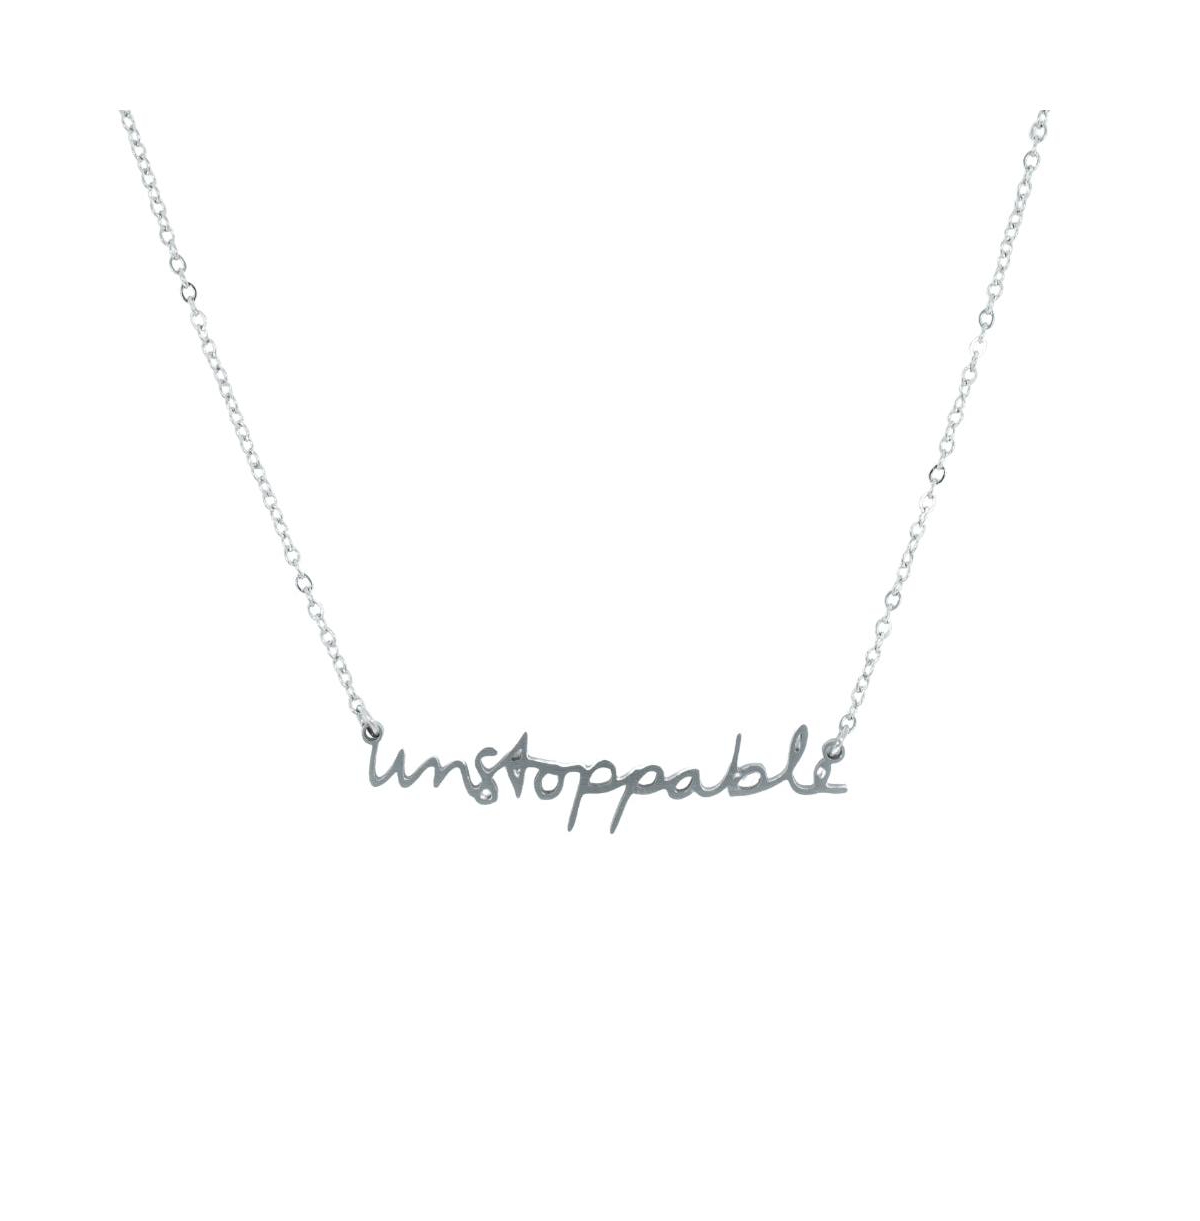 316L Absolute Affirmation Silver-Tone "Unstoppable" Necklace - Silver